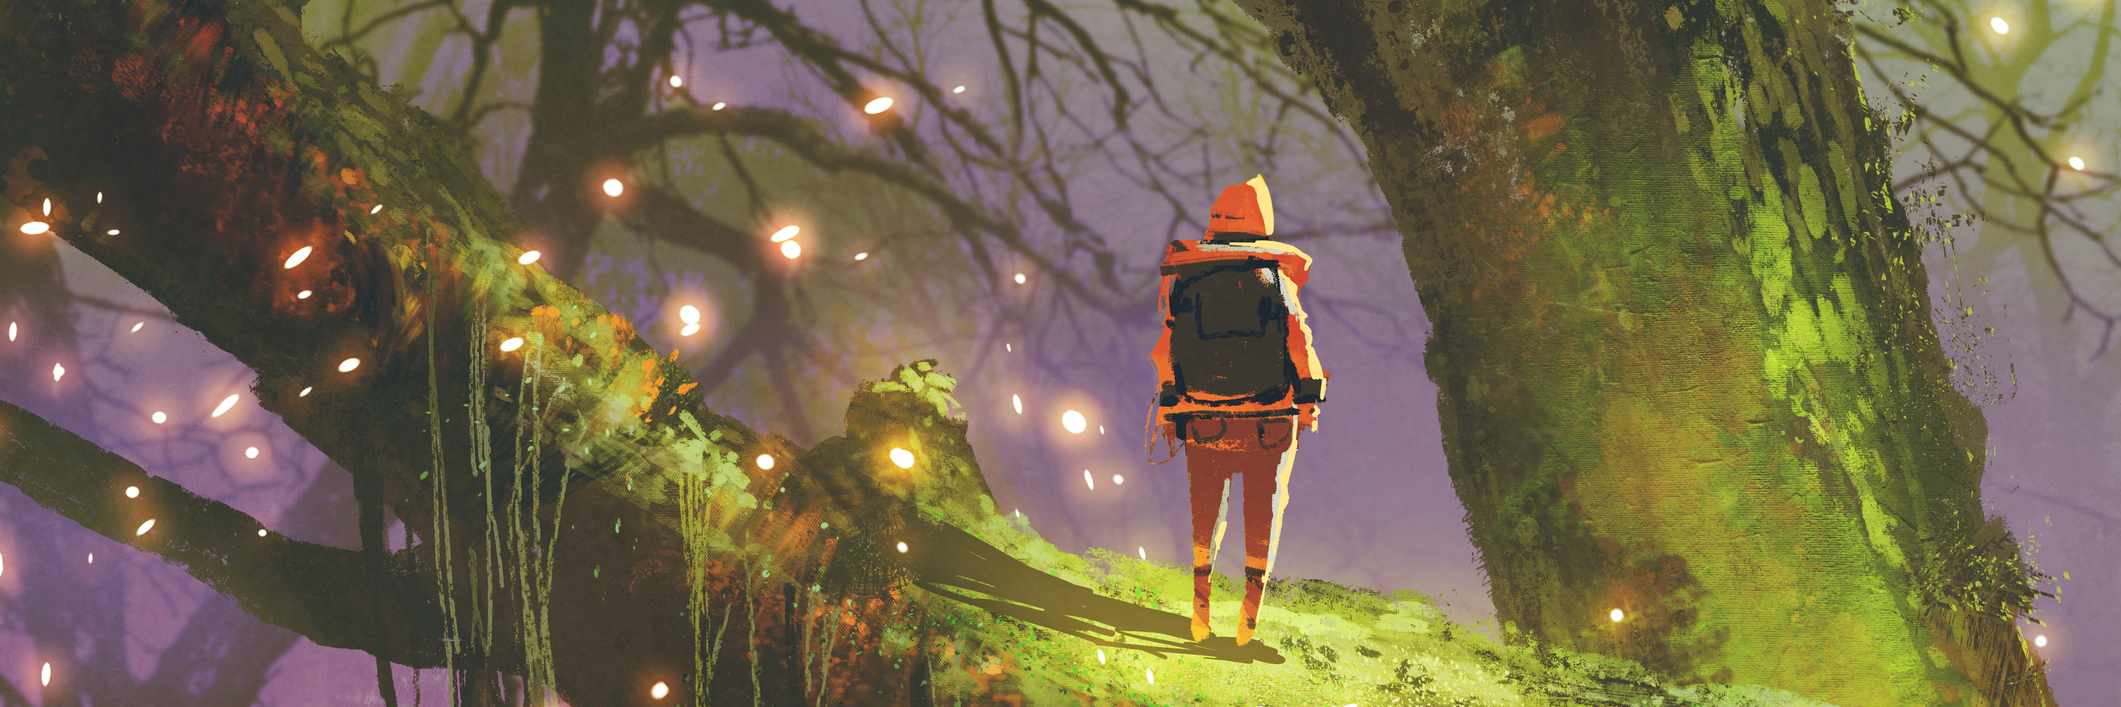 hiker with backpack standing on giant tree with fireflies in enchanted forest, digital art style, illustration painting